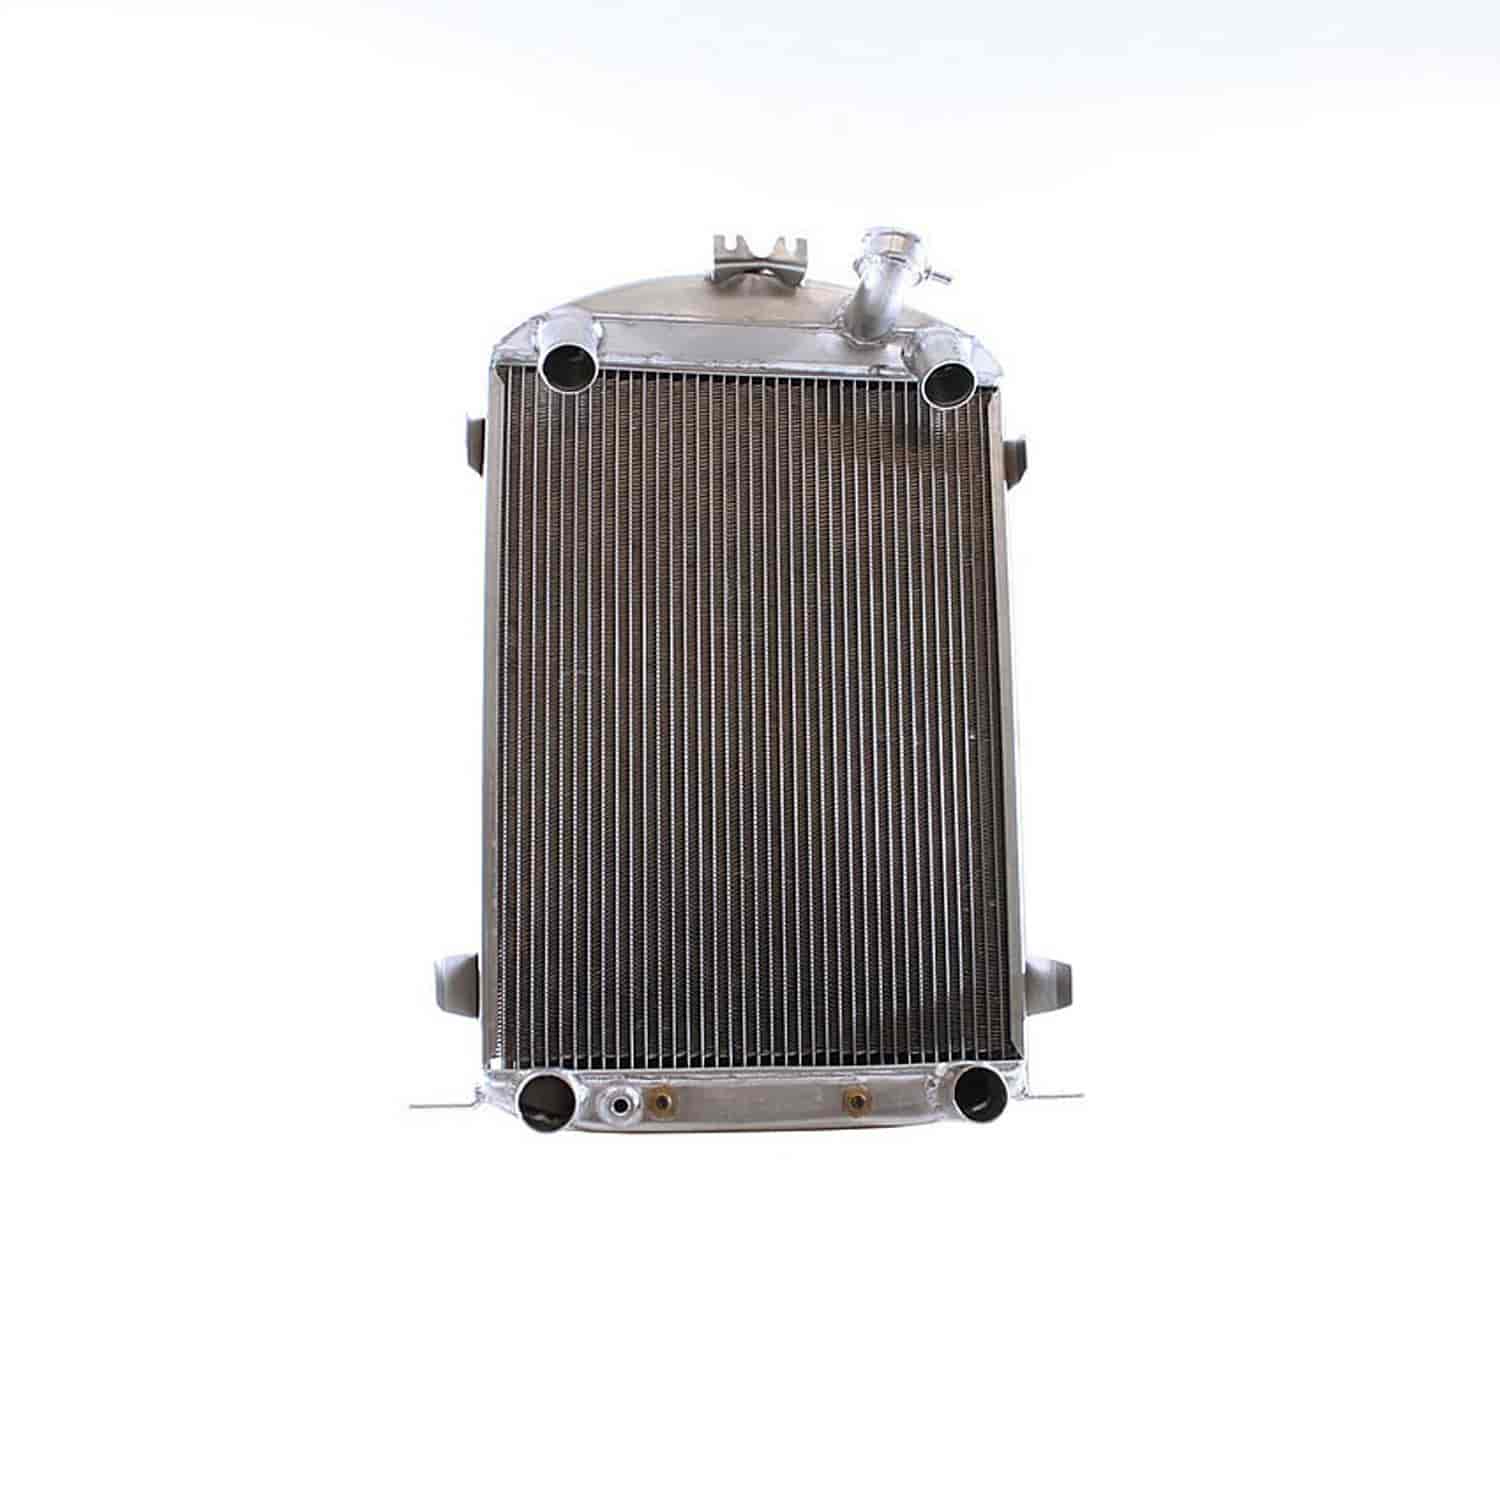 ExactFit Radiator for 1932 Model B with Early Ford Flathead V8